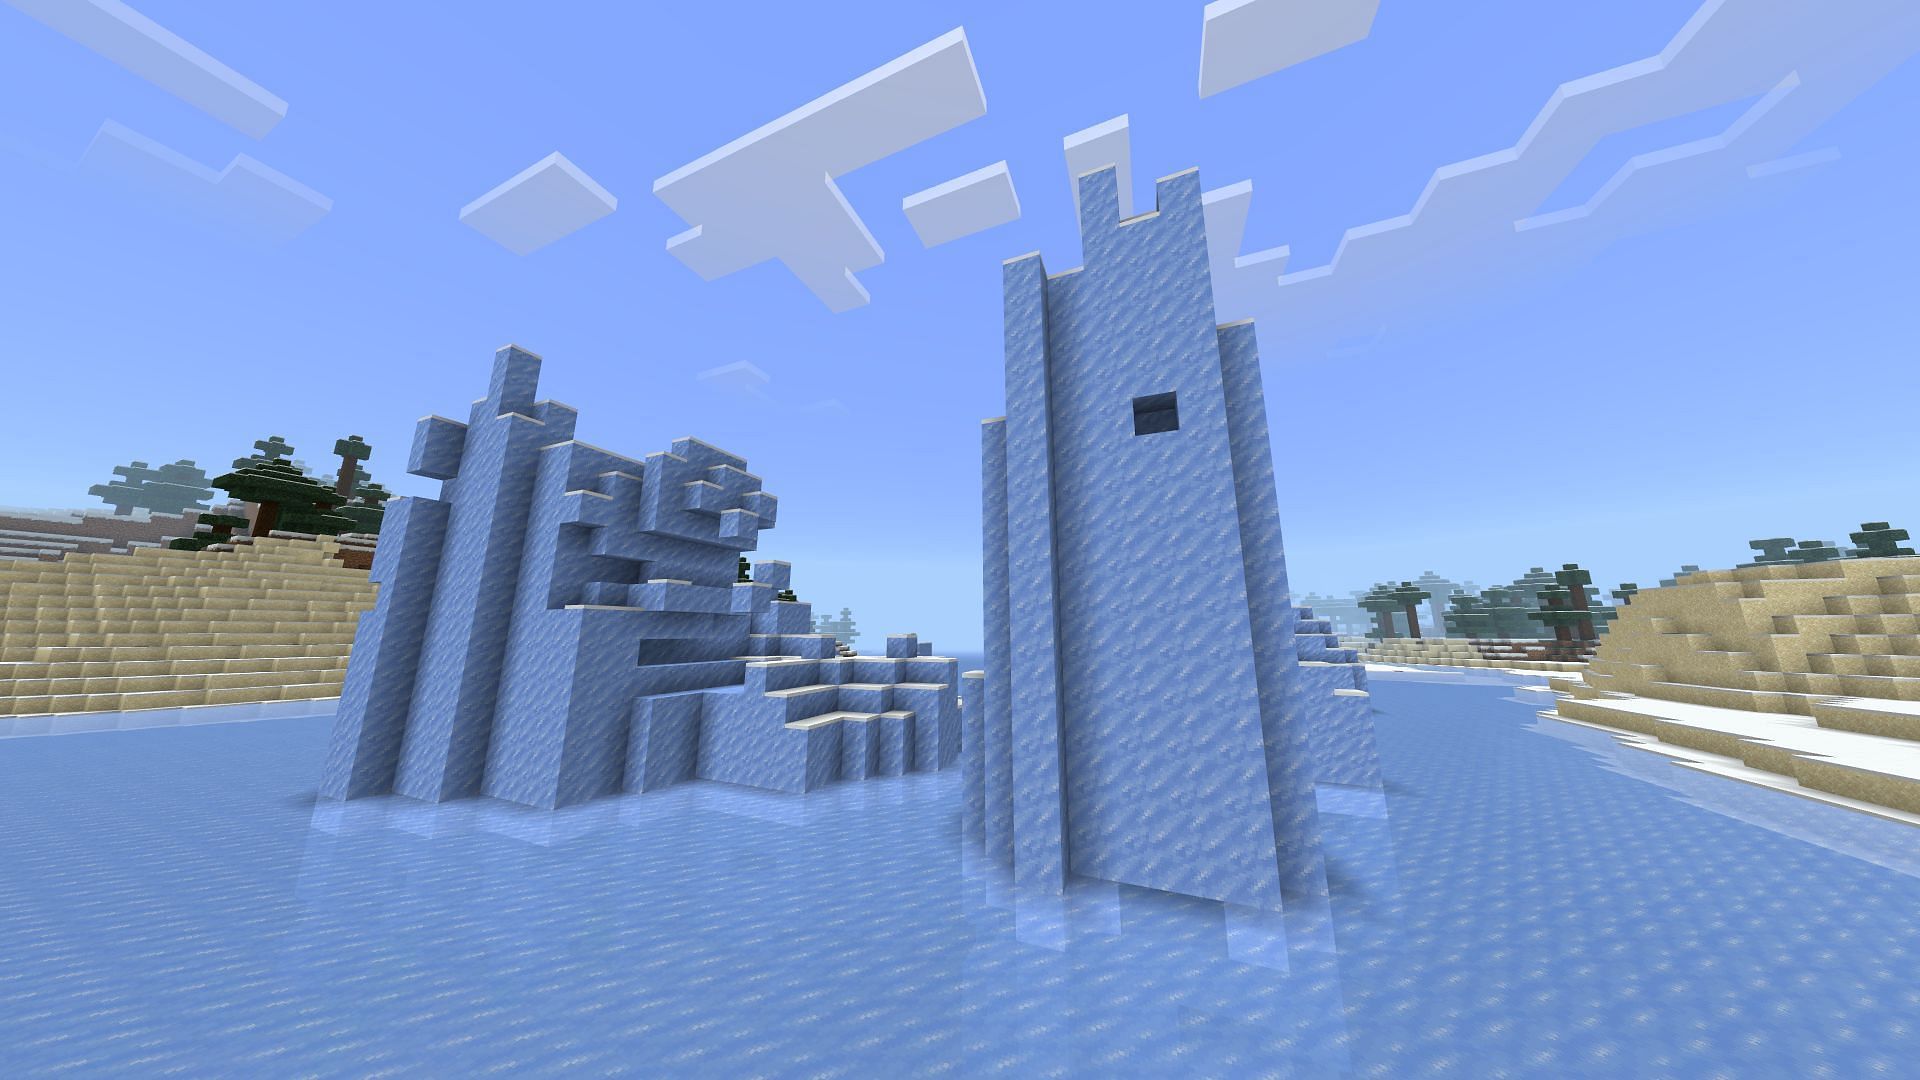 Packed ice as icebergs in Minecraft (Image via Mojang)